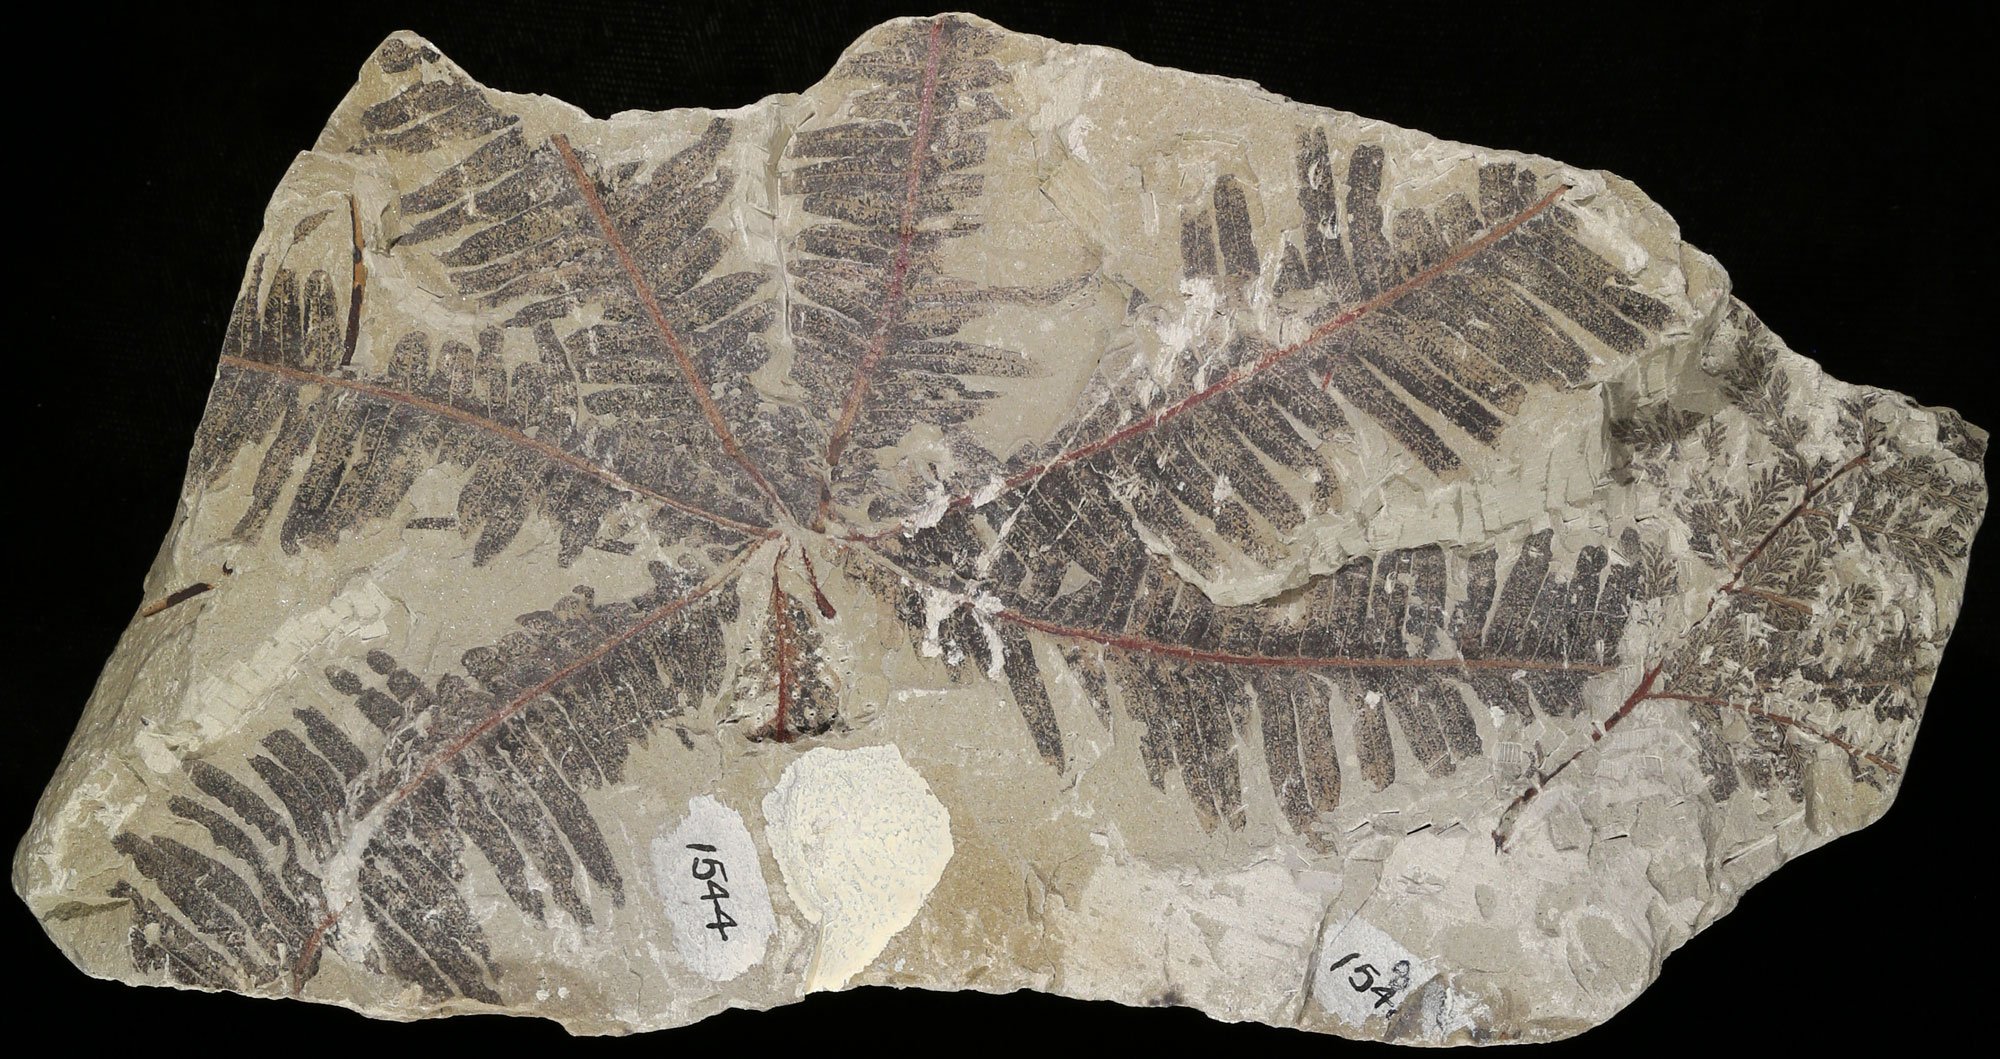 Photograph of a piece of rock from the Chinle Formation of Arizona with two fern fronds on its surface. The larger frond on the left is palmately compound with pinnately compound divisions. The frond on the right is smaller and two- to three-times pinnately compound.